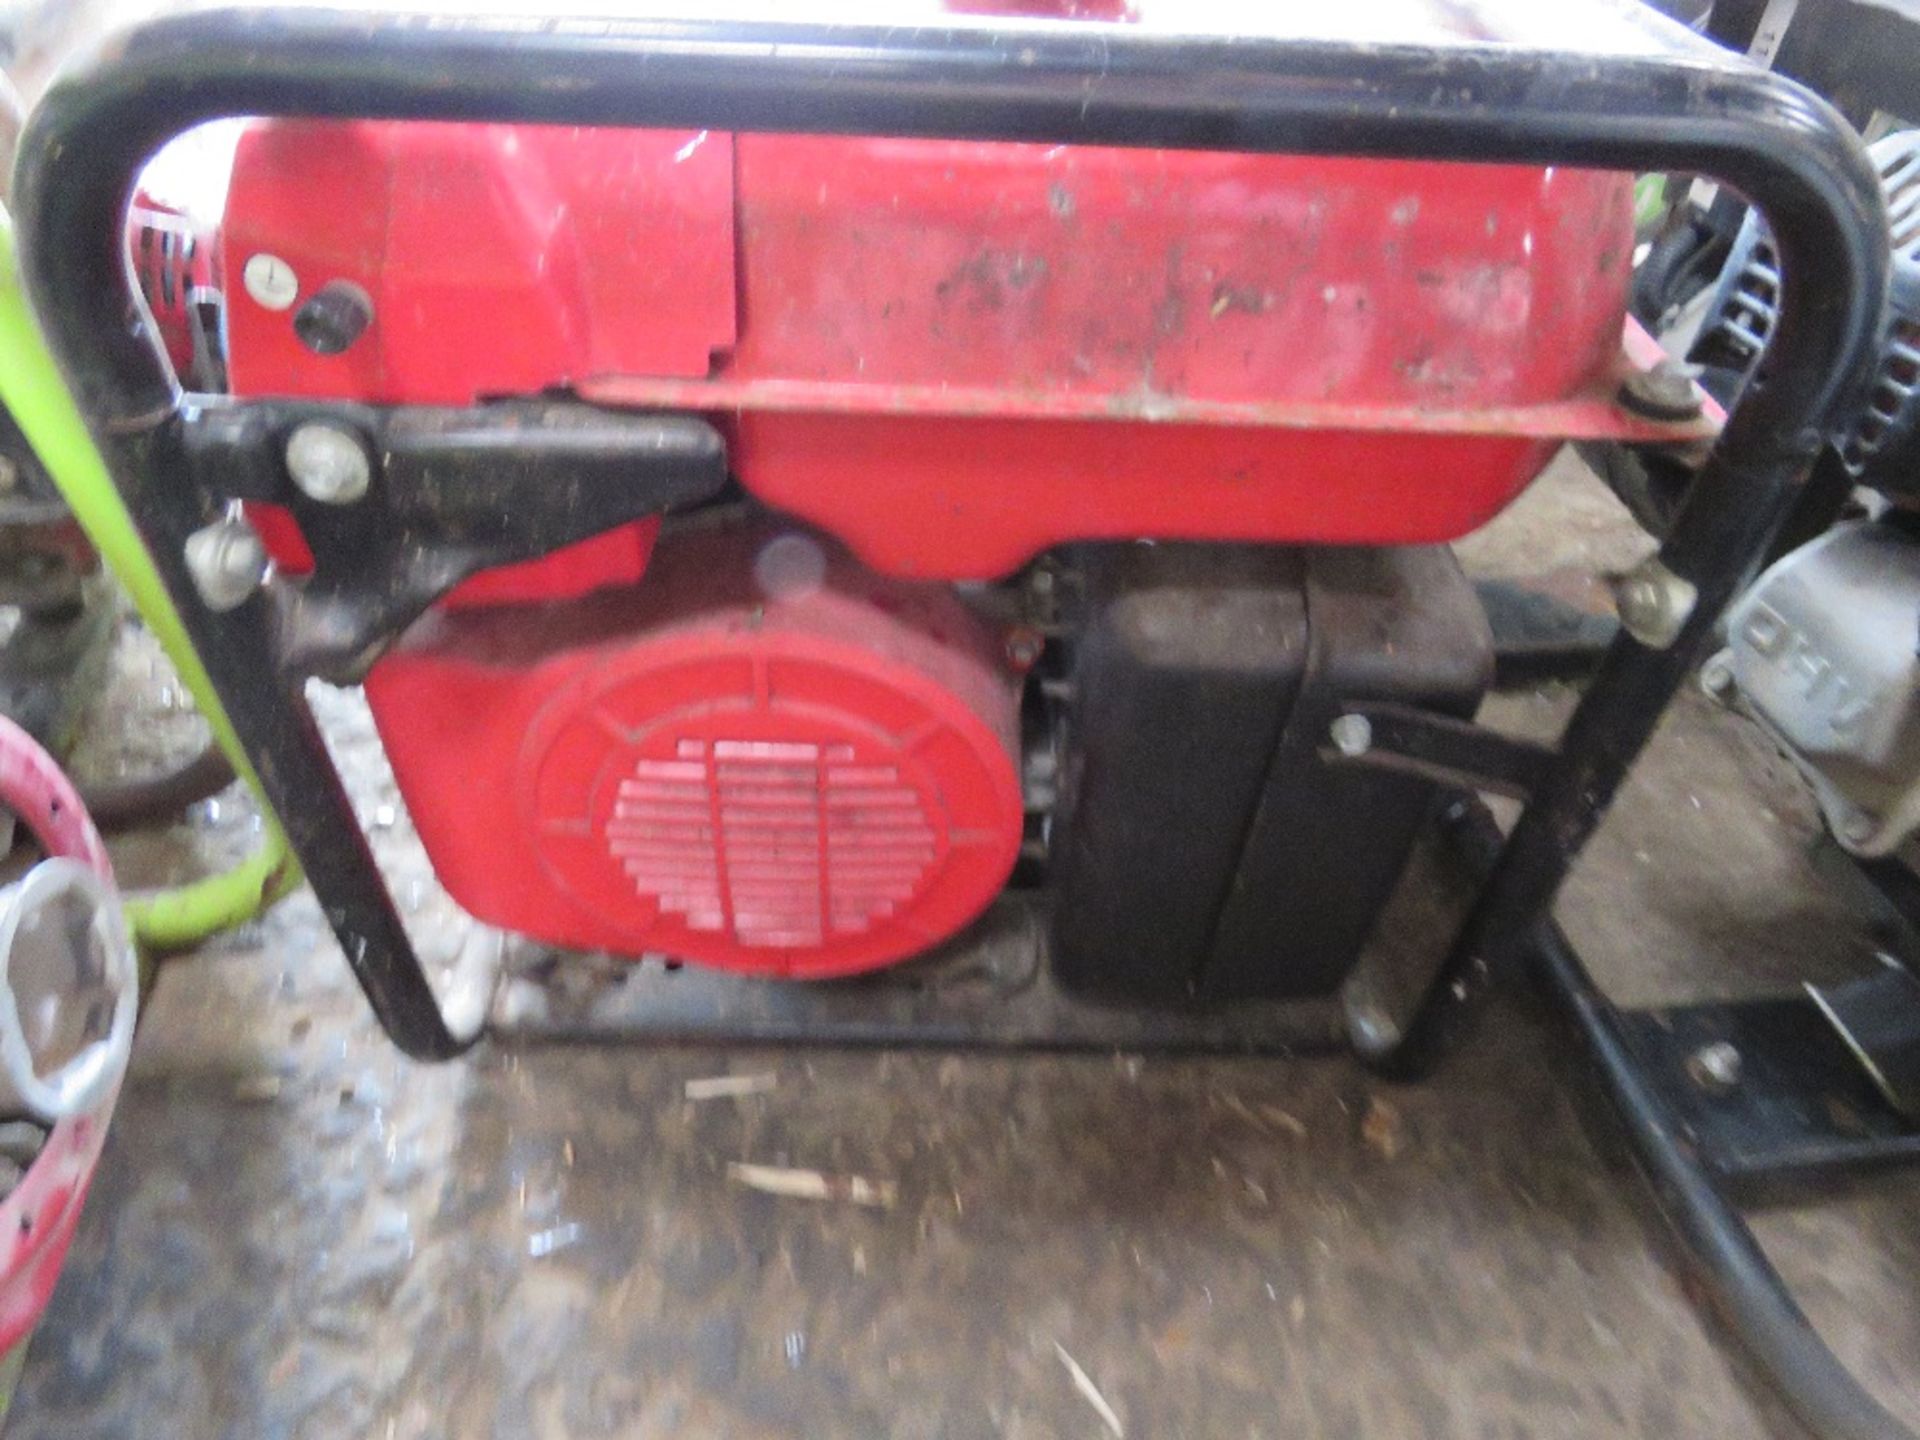 PETROL ENGINED GENERATOR, CONDITION UNKNOWN. DIRECT FROM UTILITIES CONTRACTOR. - Image 2 of 3